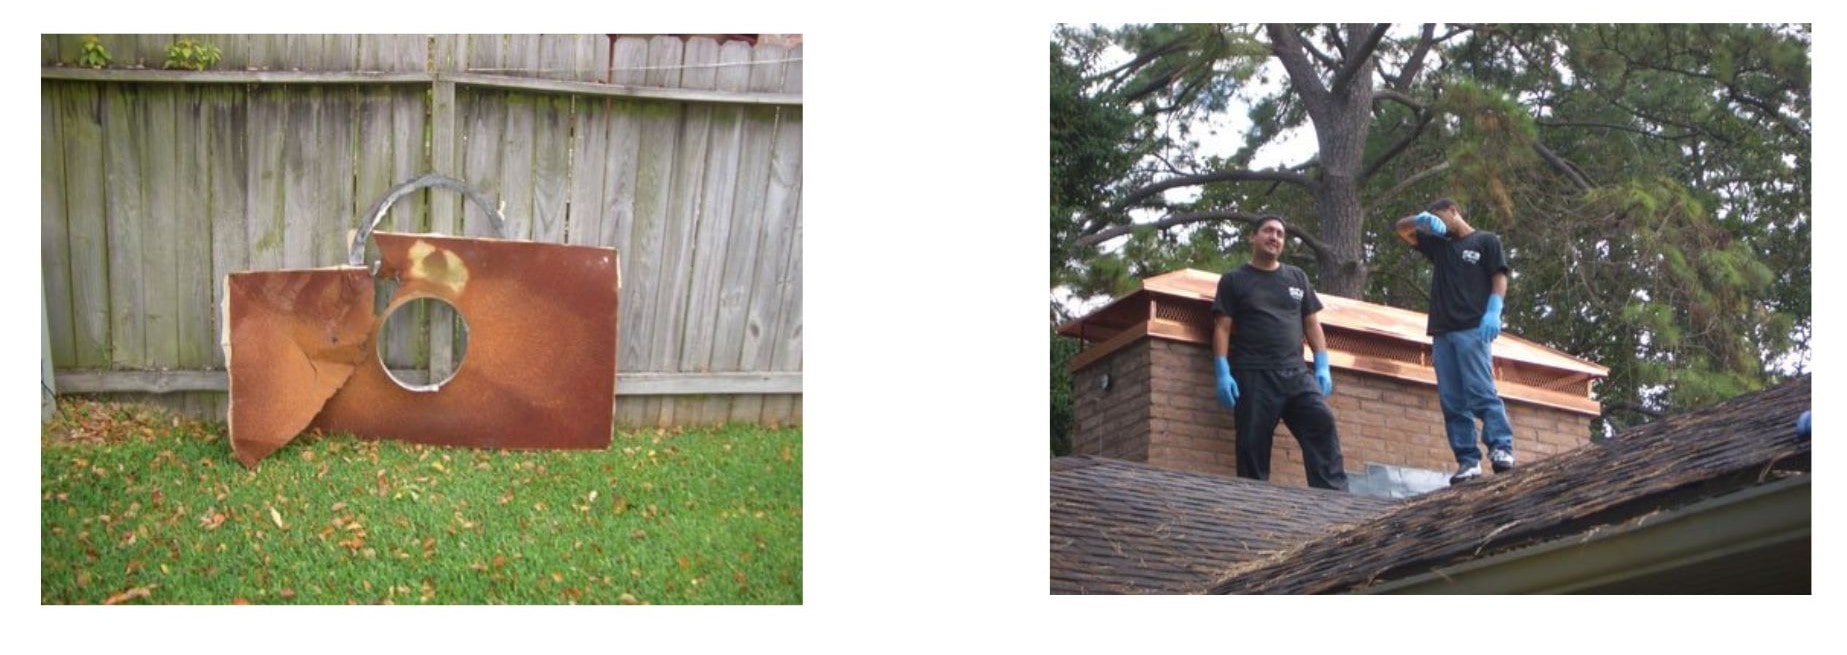 2 men on roof after installing new chimney cap. An old chimney cap is sitting against a fence.